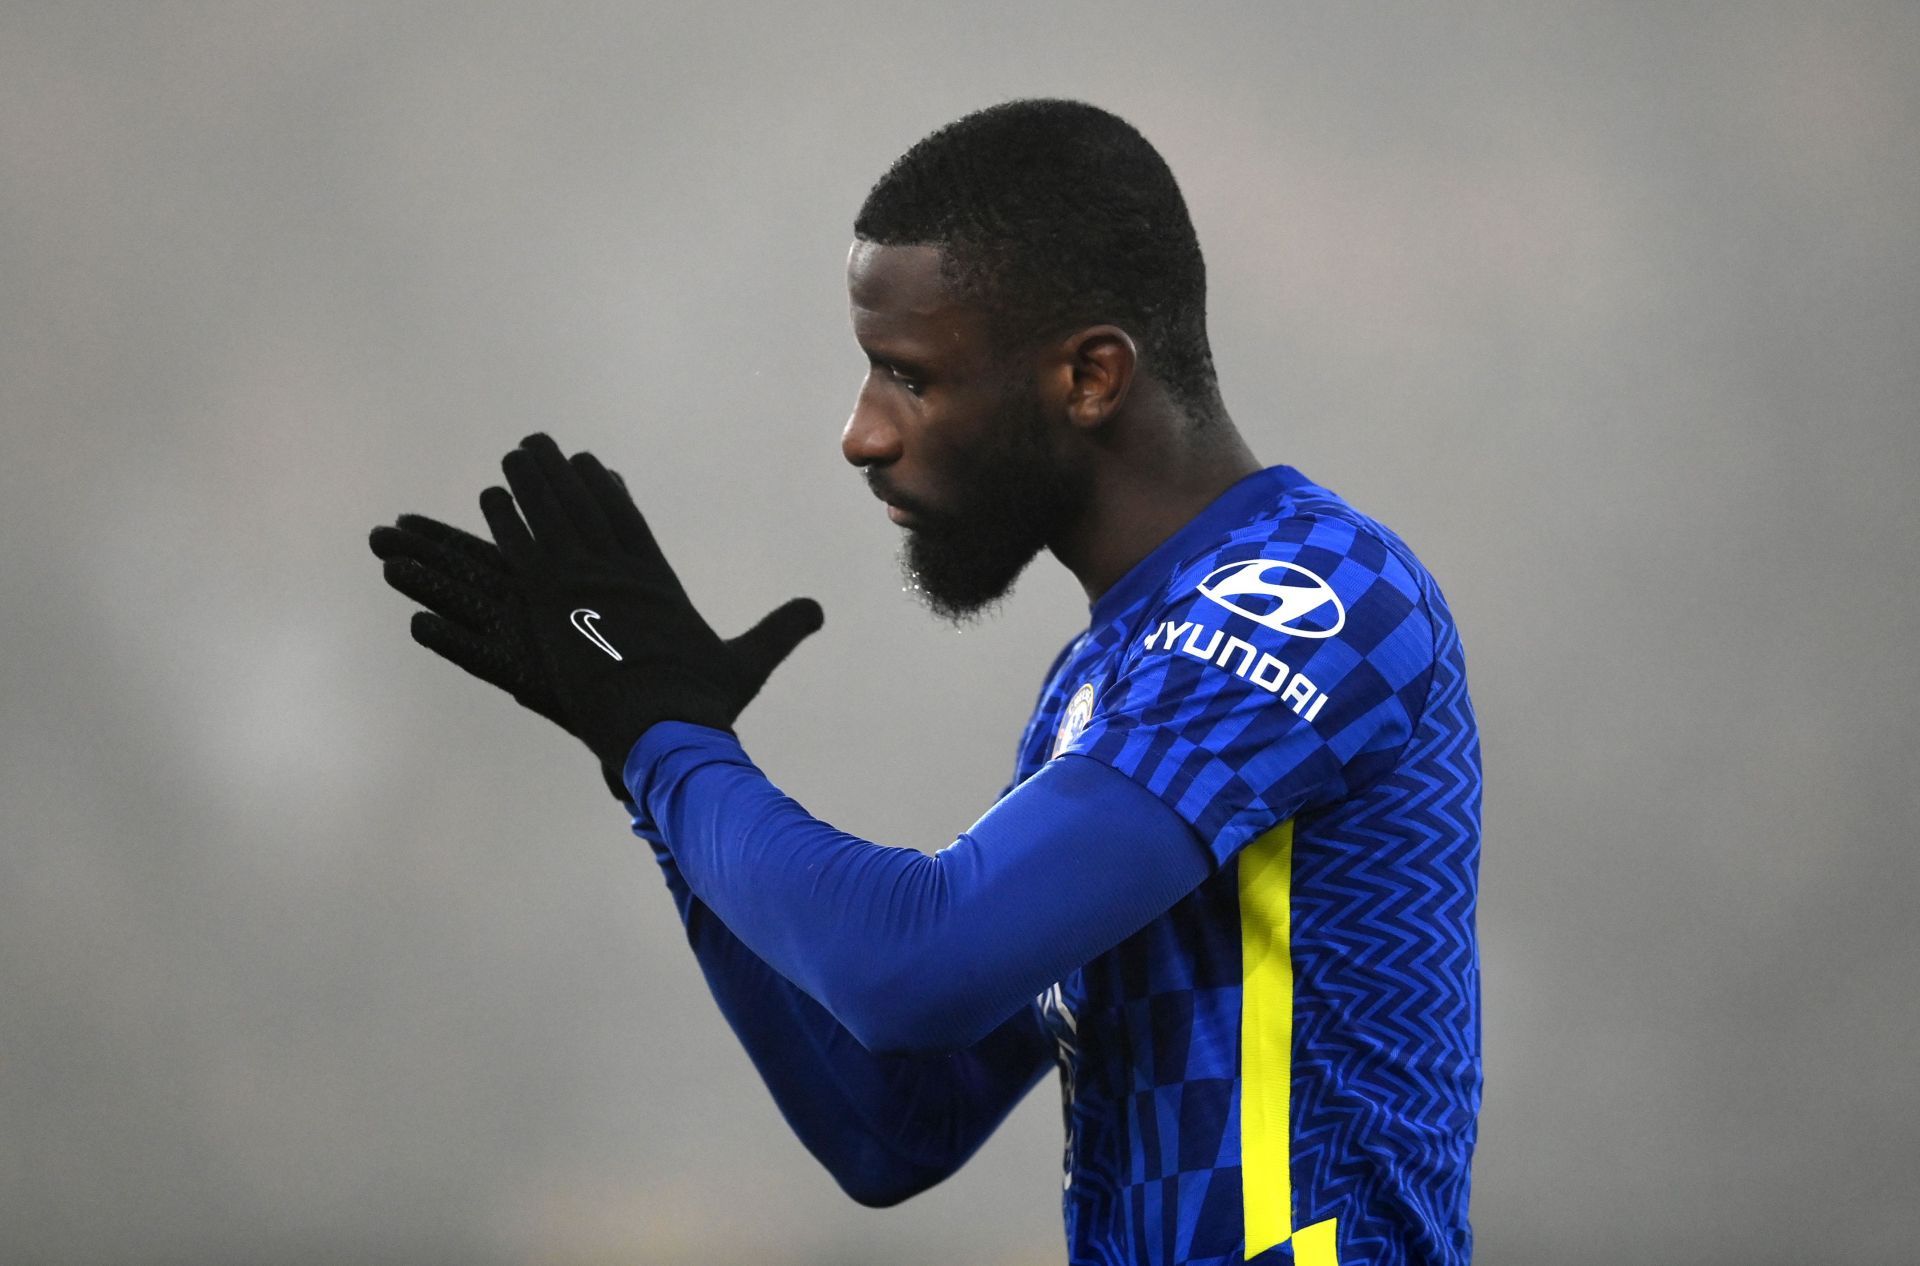 Manchester United are preparing a blockbuster offer to prise Antonio Rudiger away from Chelsea.